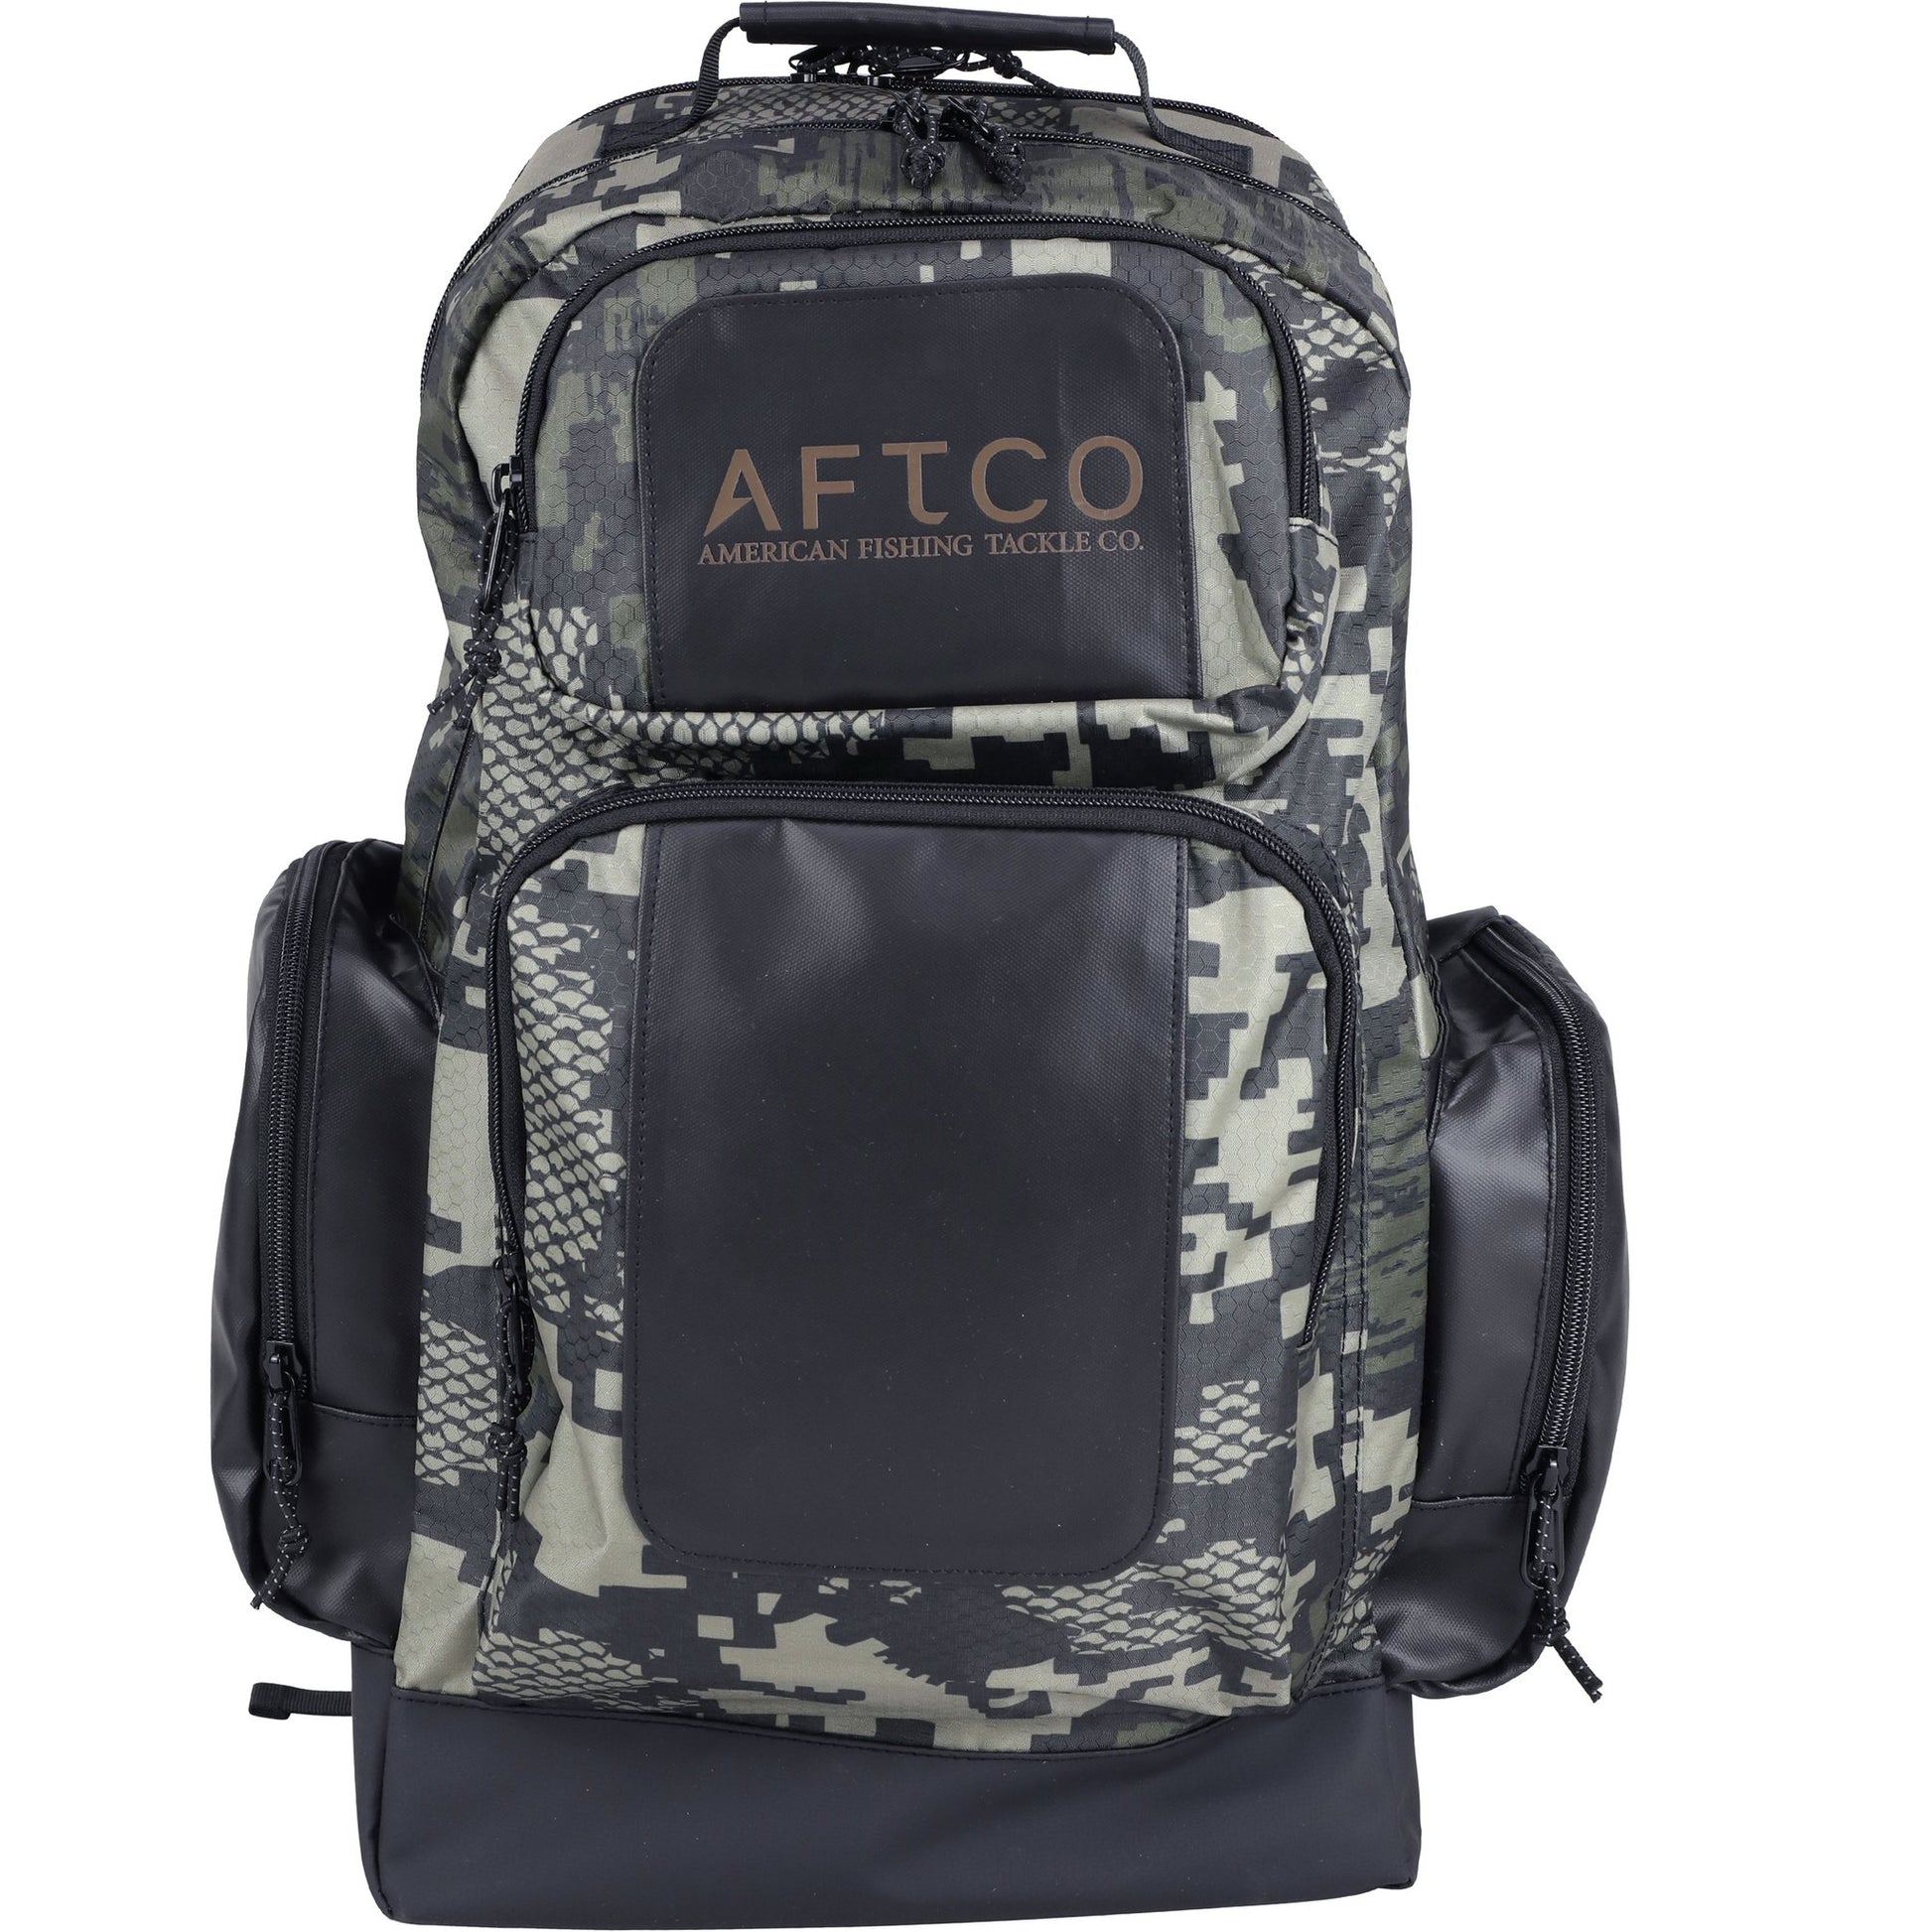 Aftco Backpack  Dogfish Tackle & Marine